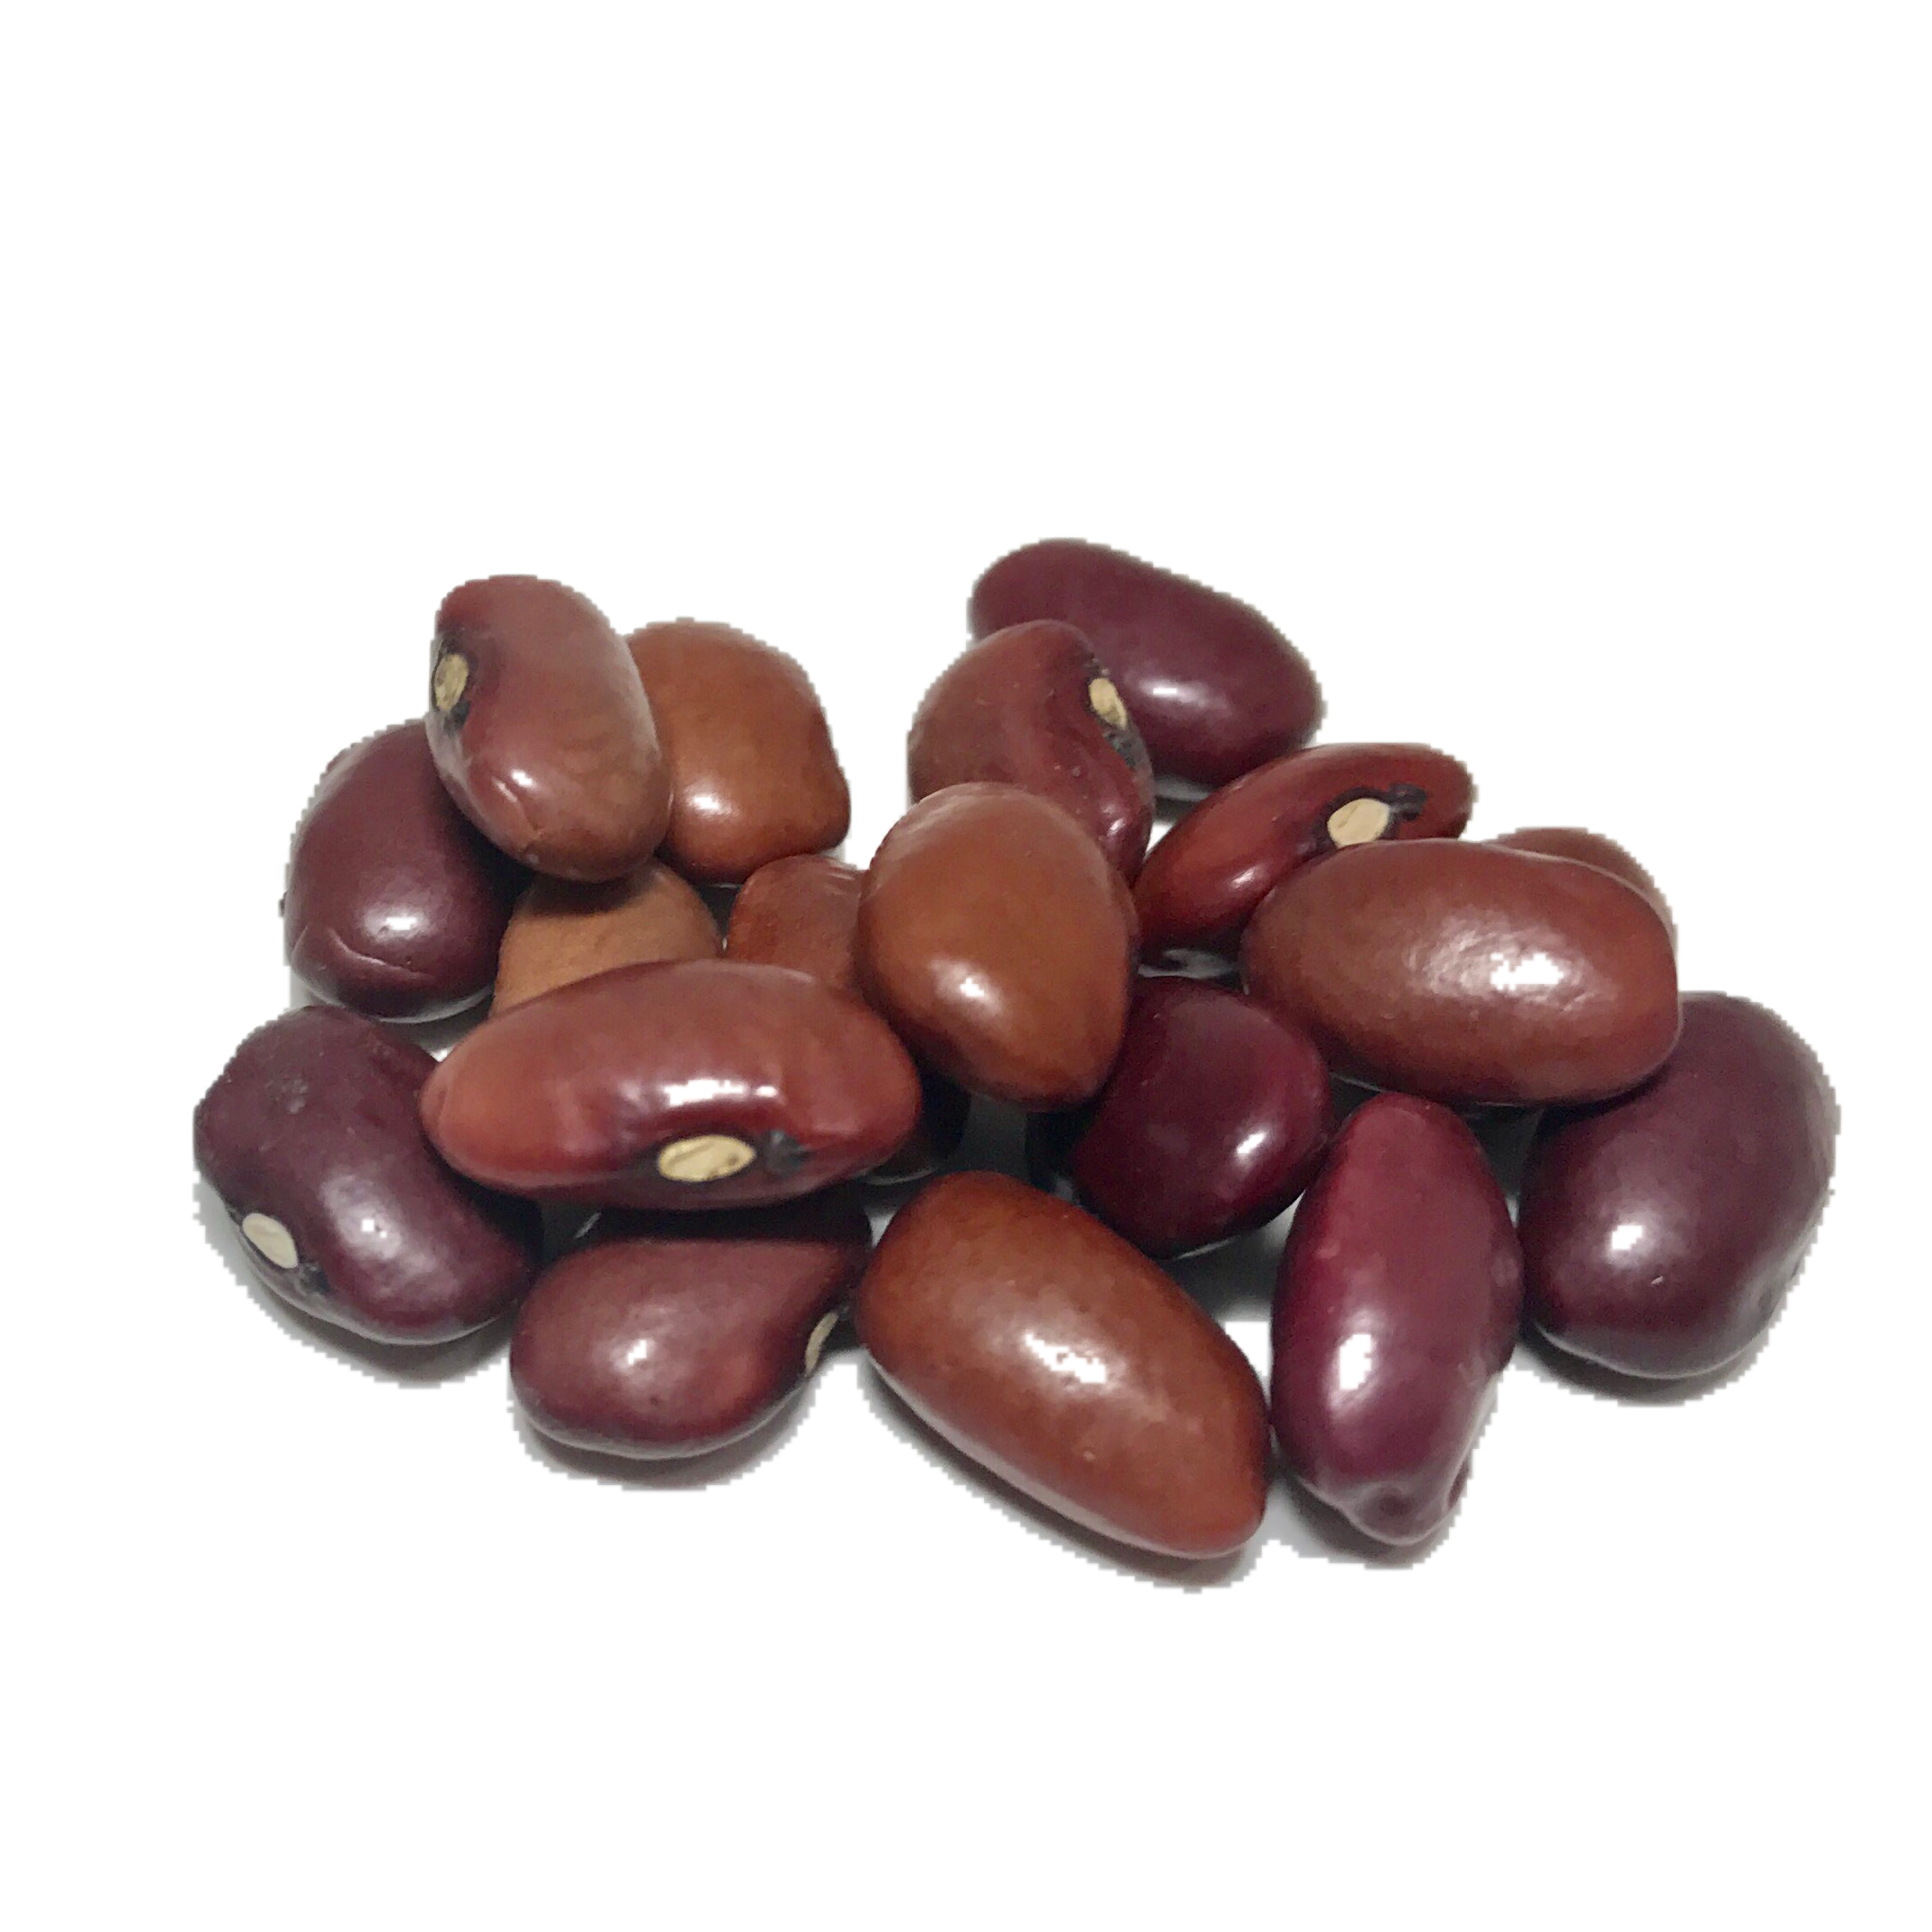 Dry Beans PNG - 161281